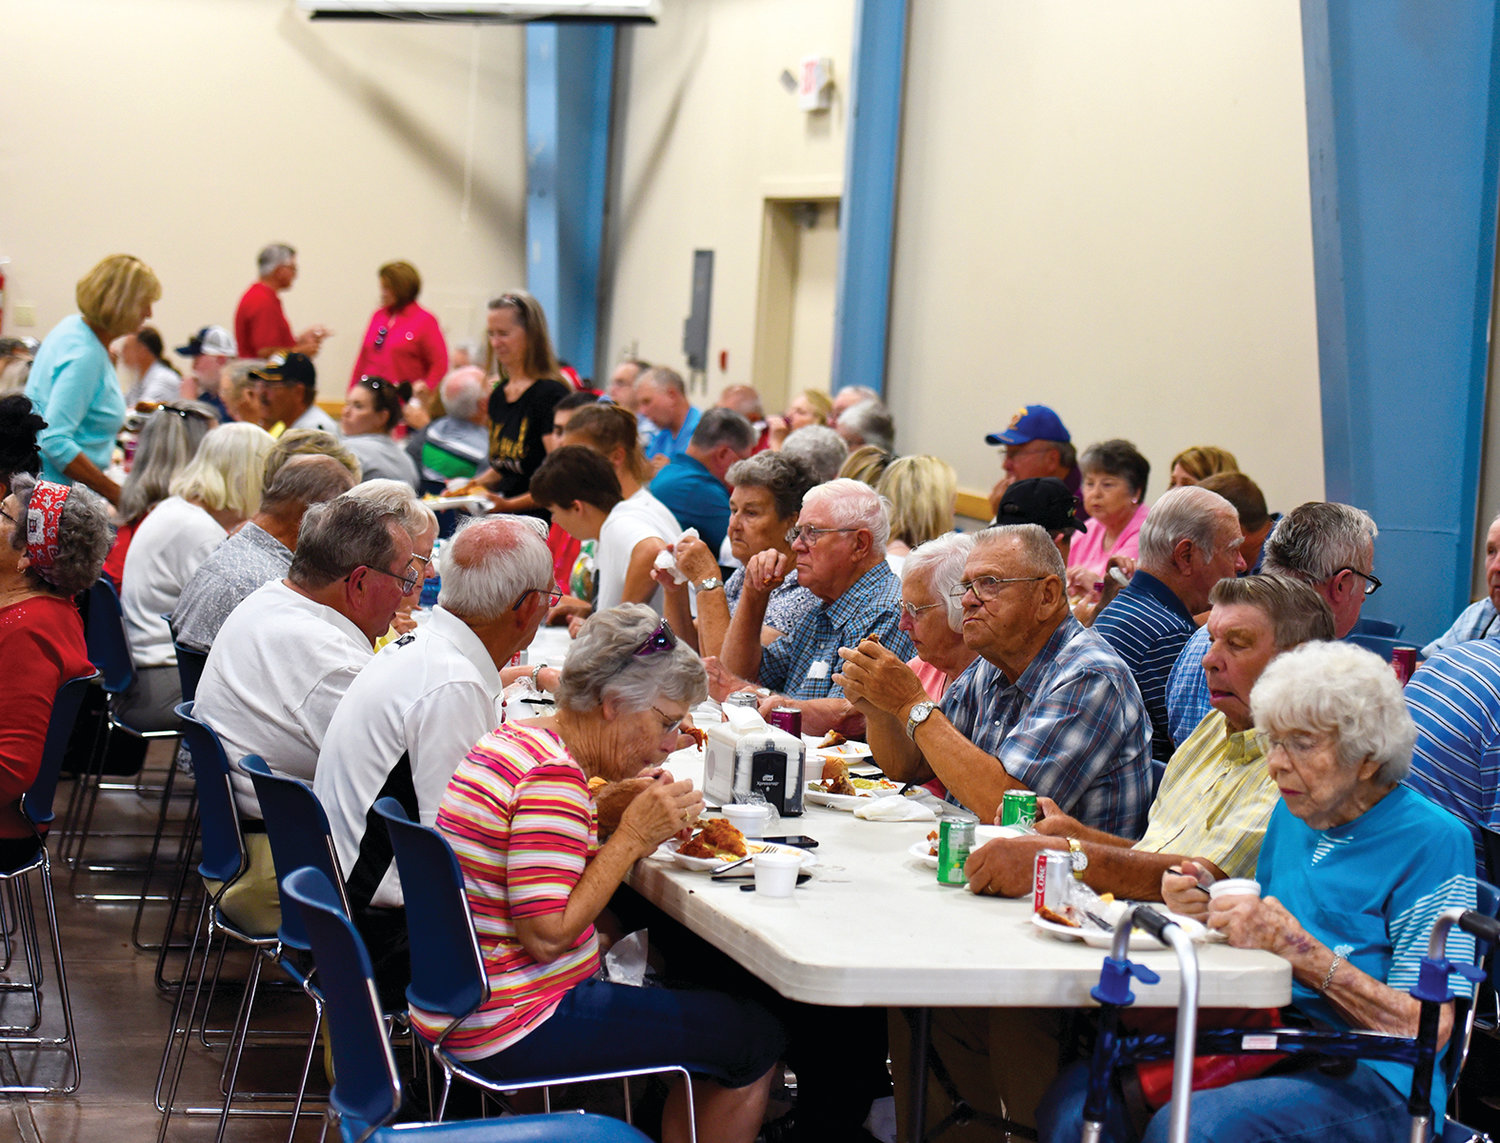 A large crowd turned out Friday for the Three Rivers Electric Cooperative annual meeting, which featured a fried chicken dinner, served by Three Rivers employees.